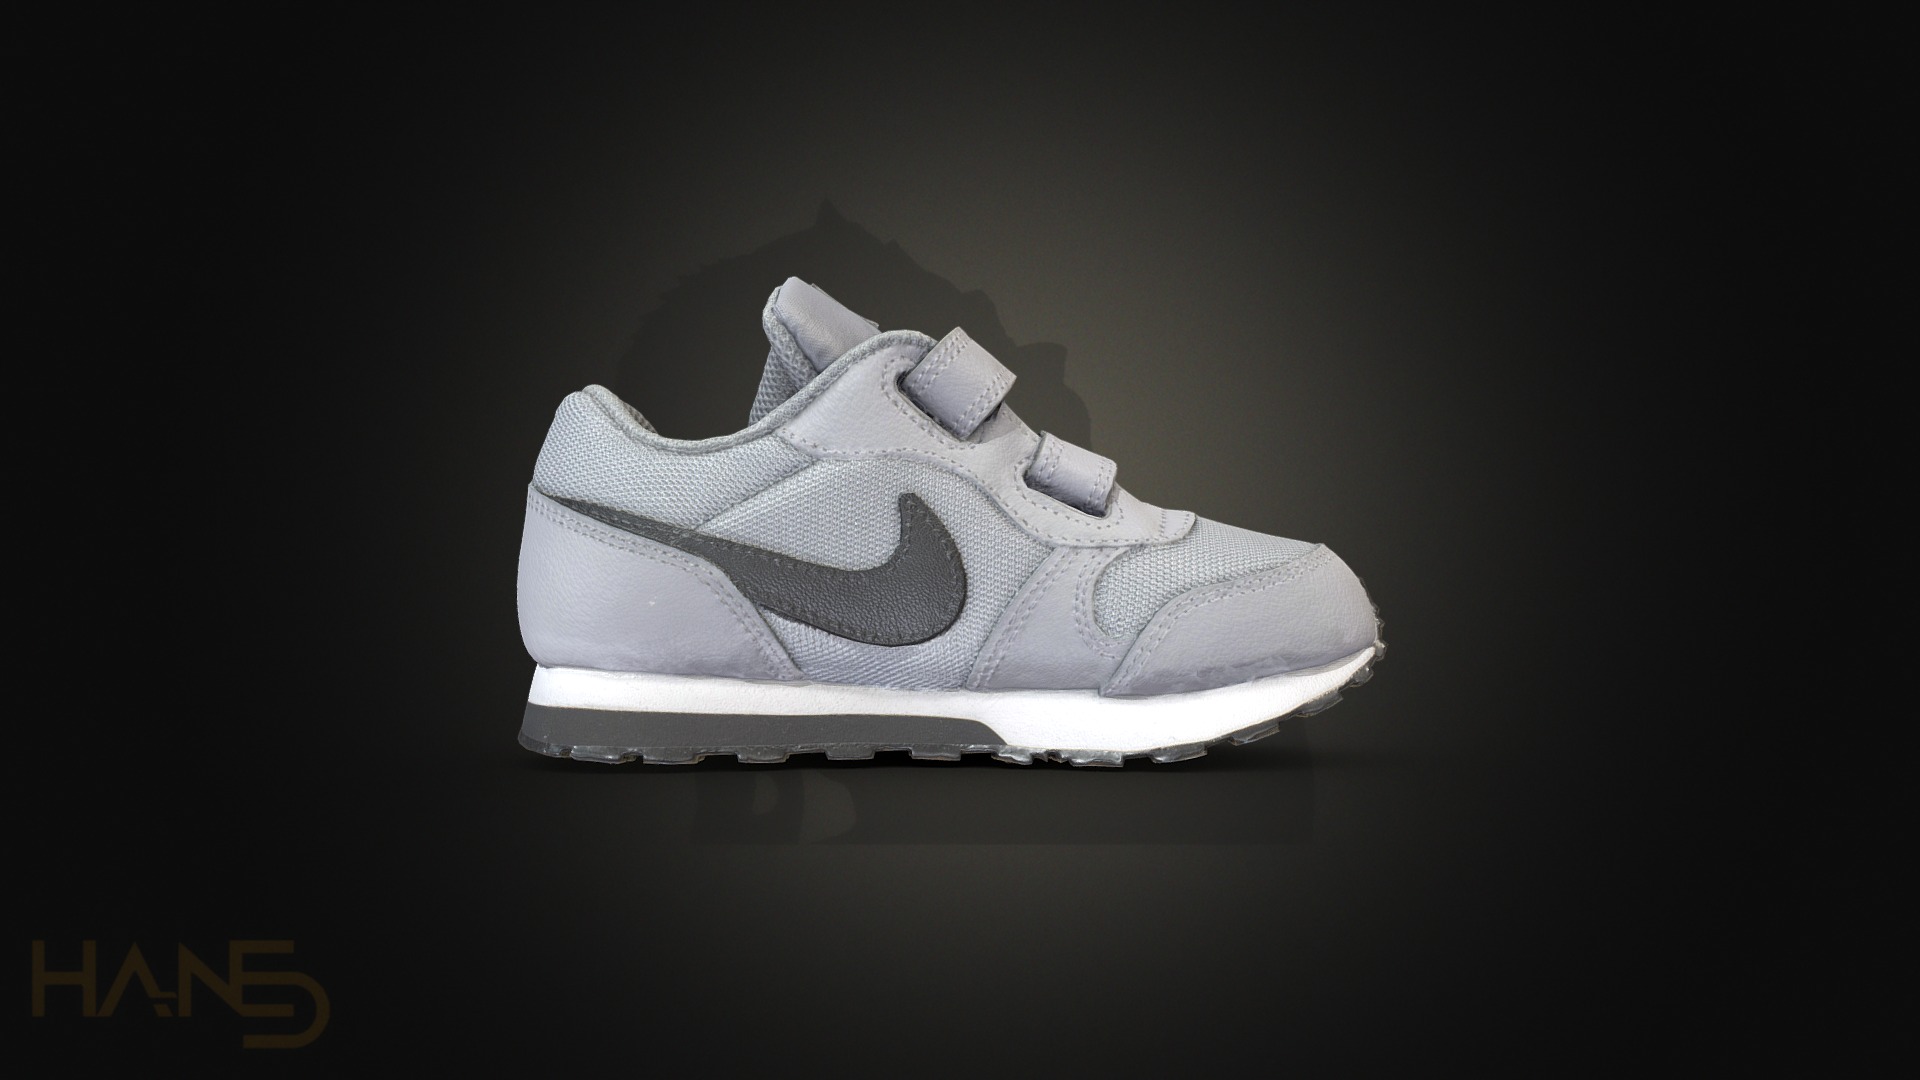 3D model Nike Kids - This is a 3D model of the Nike Kids. The 3D model is about a grey and white shoe.